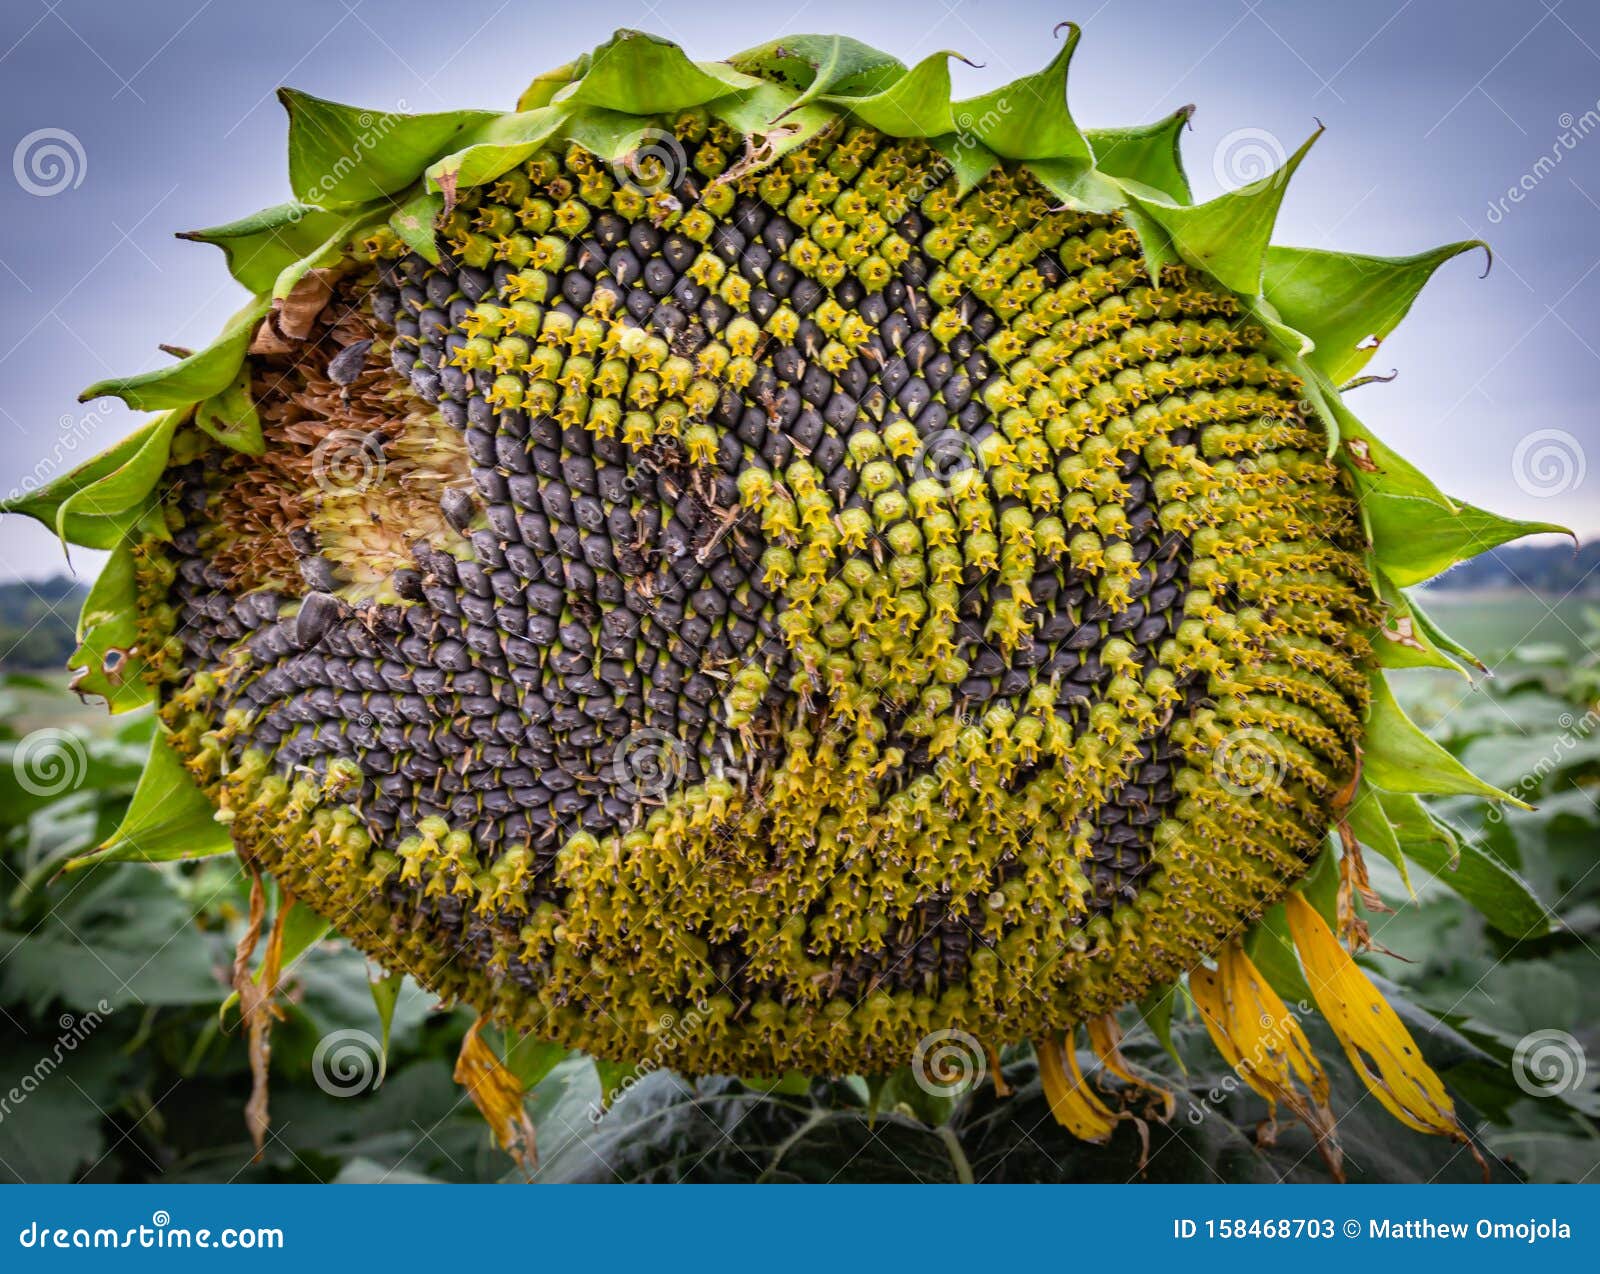 Close Up View of of Disc Florets of Sunflower Stock Image - Image of ...